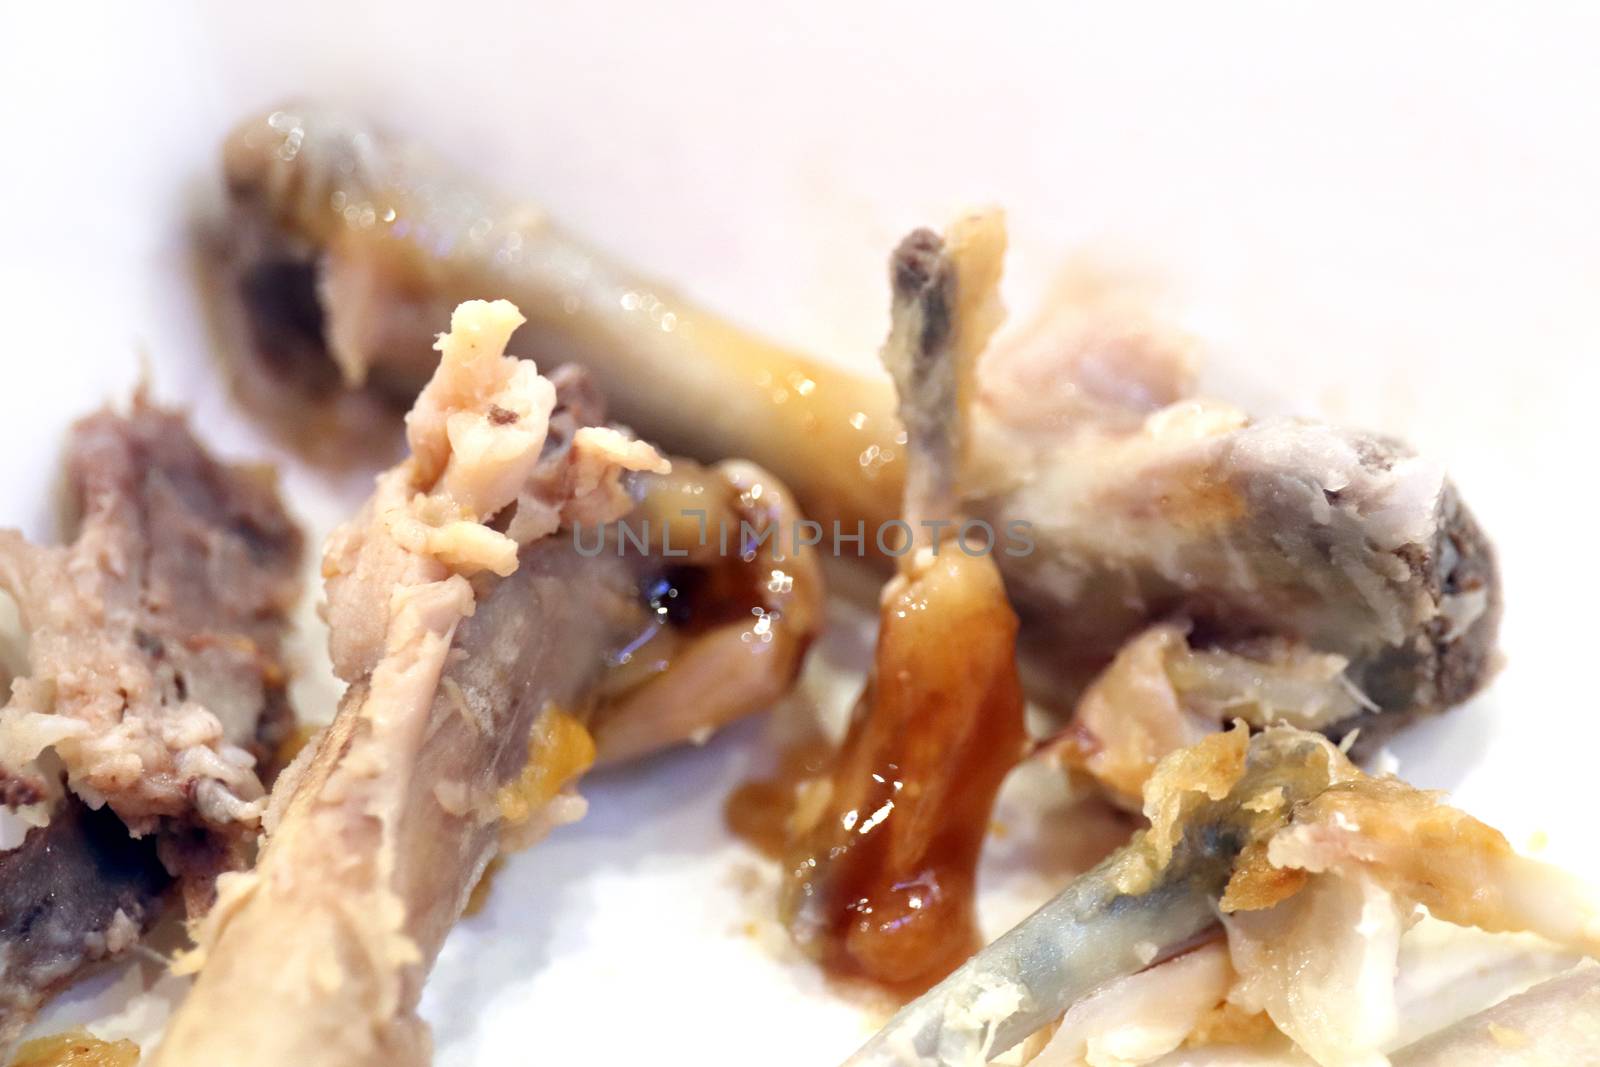 leftovers food chicken bone, waste food, chicken bone from eating, fried chicken bone waste food (selective focus) by cgdeaw